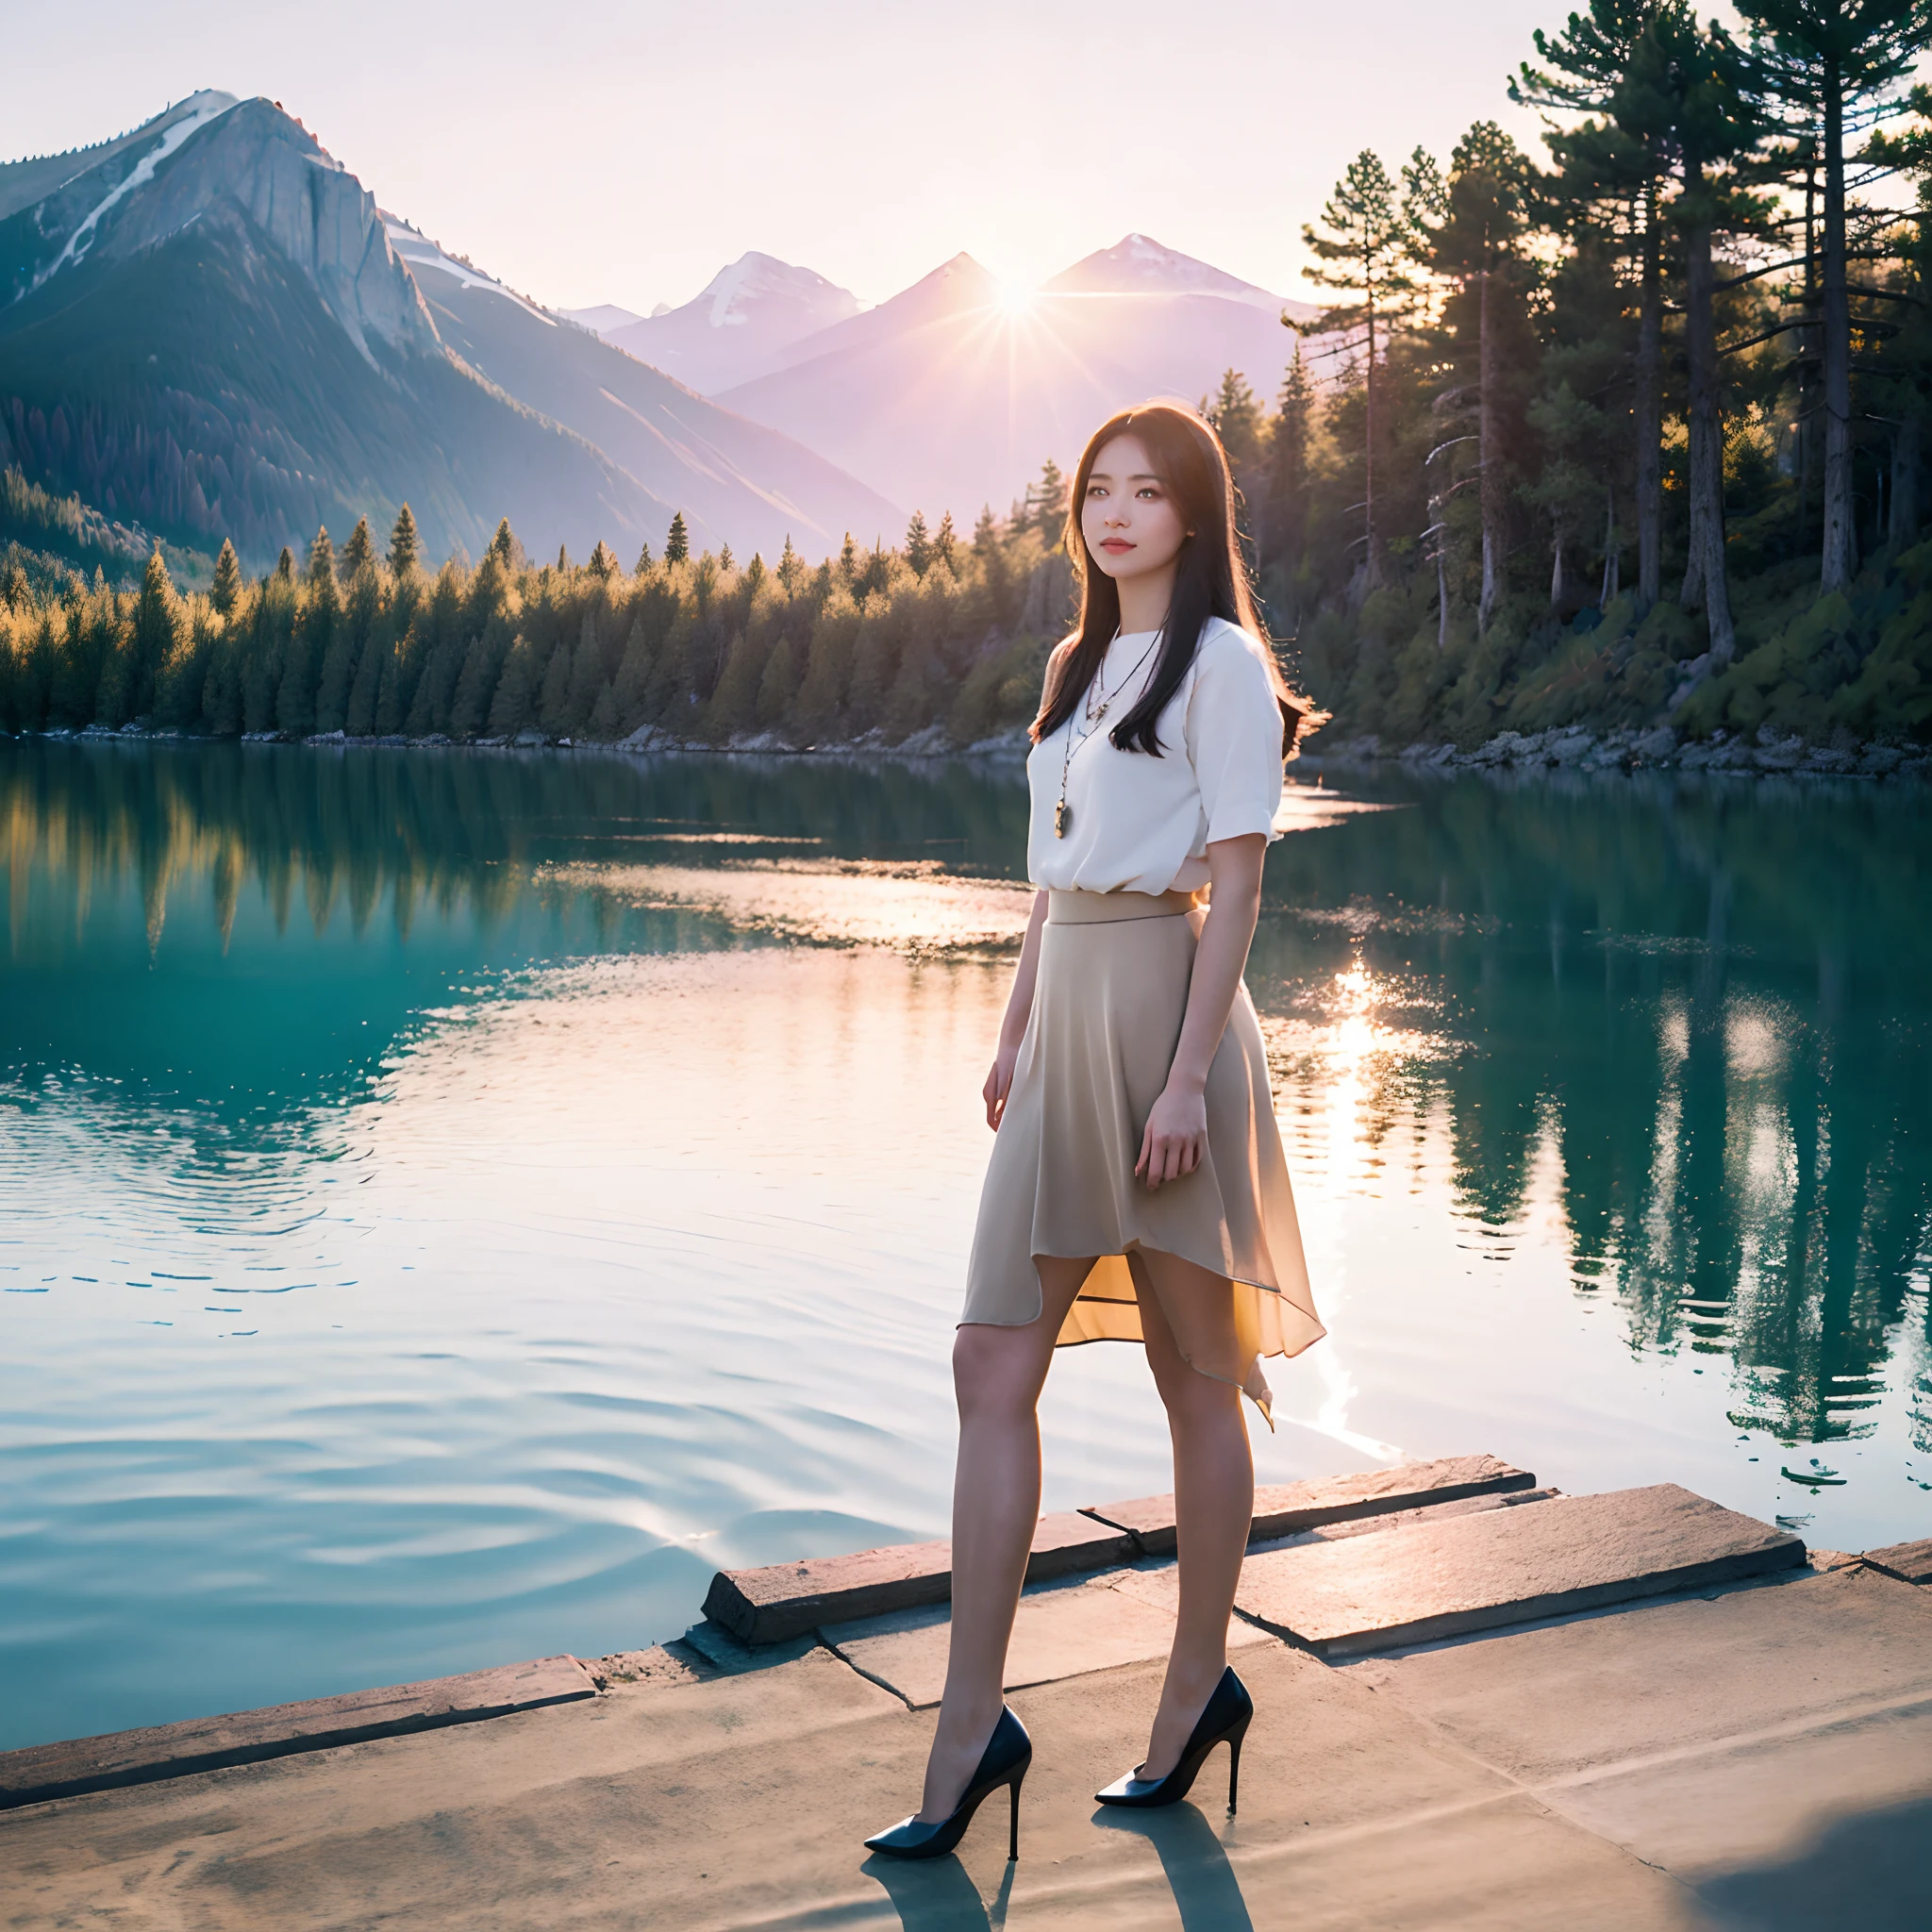 1 girl, Happy expression, Charming eyes, straight long hair, Flowing skirt, , Look at the sun, Calm posture, Porcelain-like skin, Subtle blush, crystal pendant BREAK golden hour, (Edge lighting): 1.2, Cool colors, Sun flare, Soft shadows, Bright colors, painterly effect, Wonderful atmosphere of resting on a scenic lake, Distant mountains, pines, Mountain tops, Pondering, Sunlit clouds, Tranquil atmosphere, Idyllic sunrise, Ultra detailed, offcial art, Unified 8K wallpapers, zentangle, Mandala flesh-colored pantyhose heels